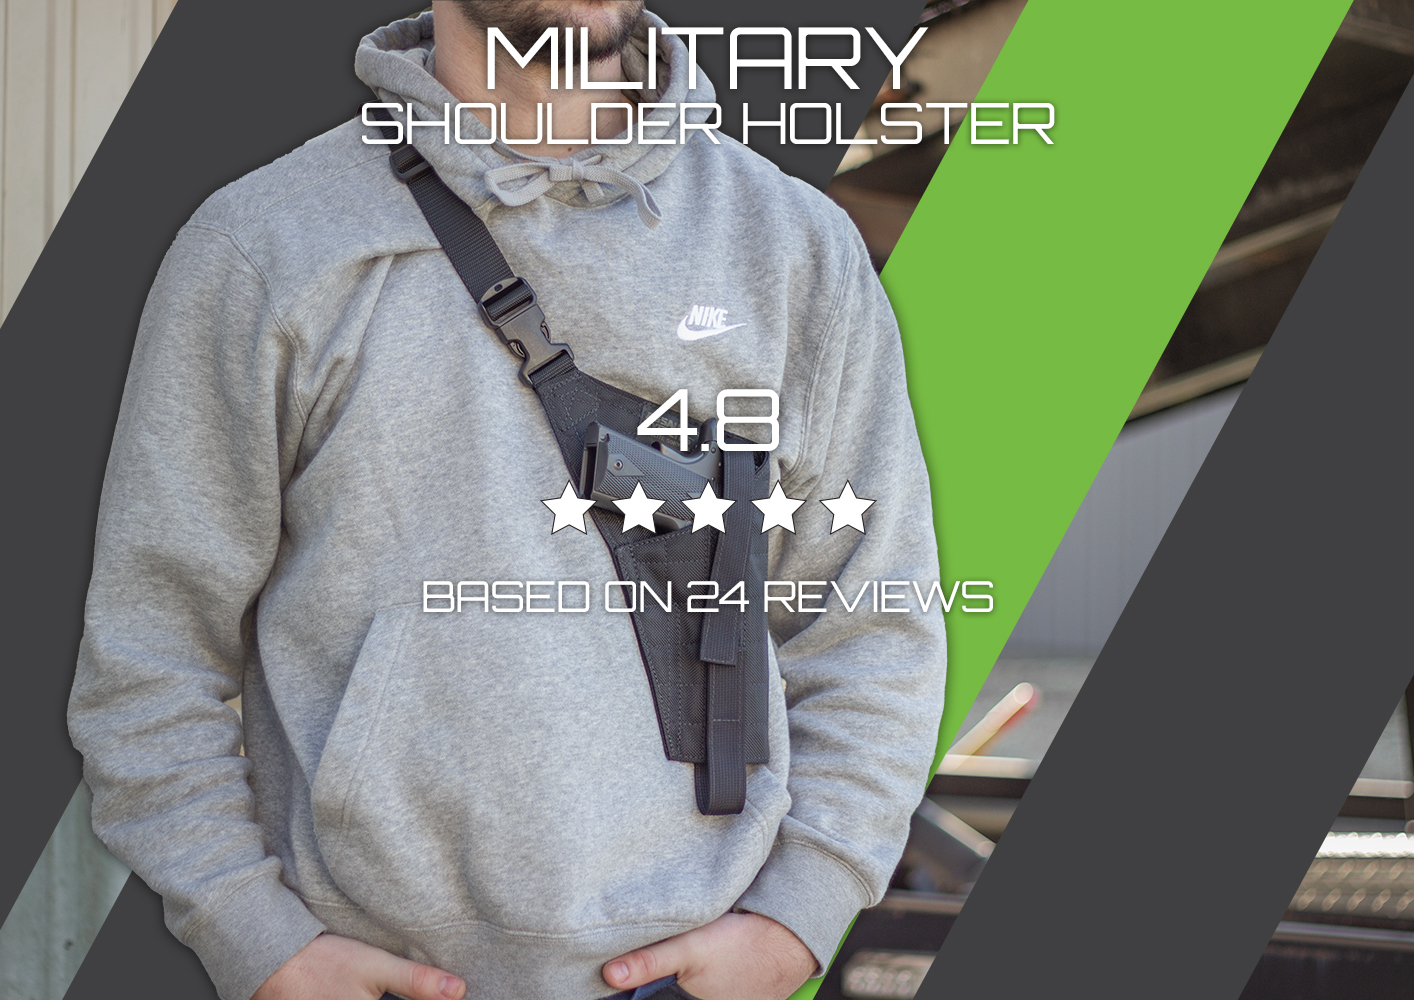 Elite Survival Military Shoulder Holster - Tactical Holster for Secure and Comfortable Carry of Firearms. Durable and Adjustable. Order Today!